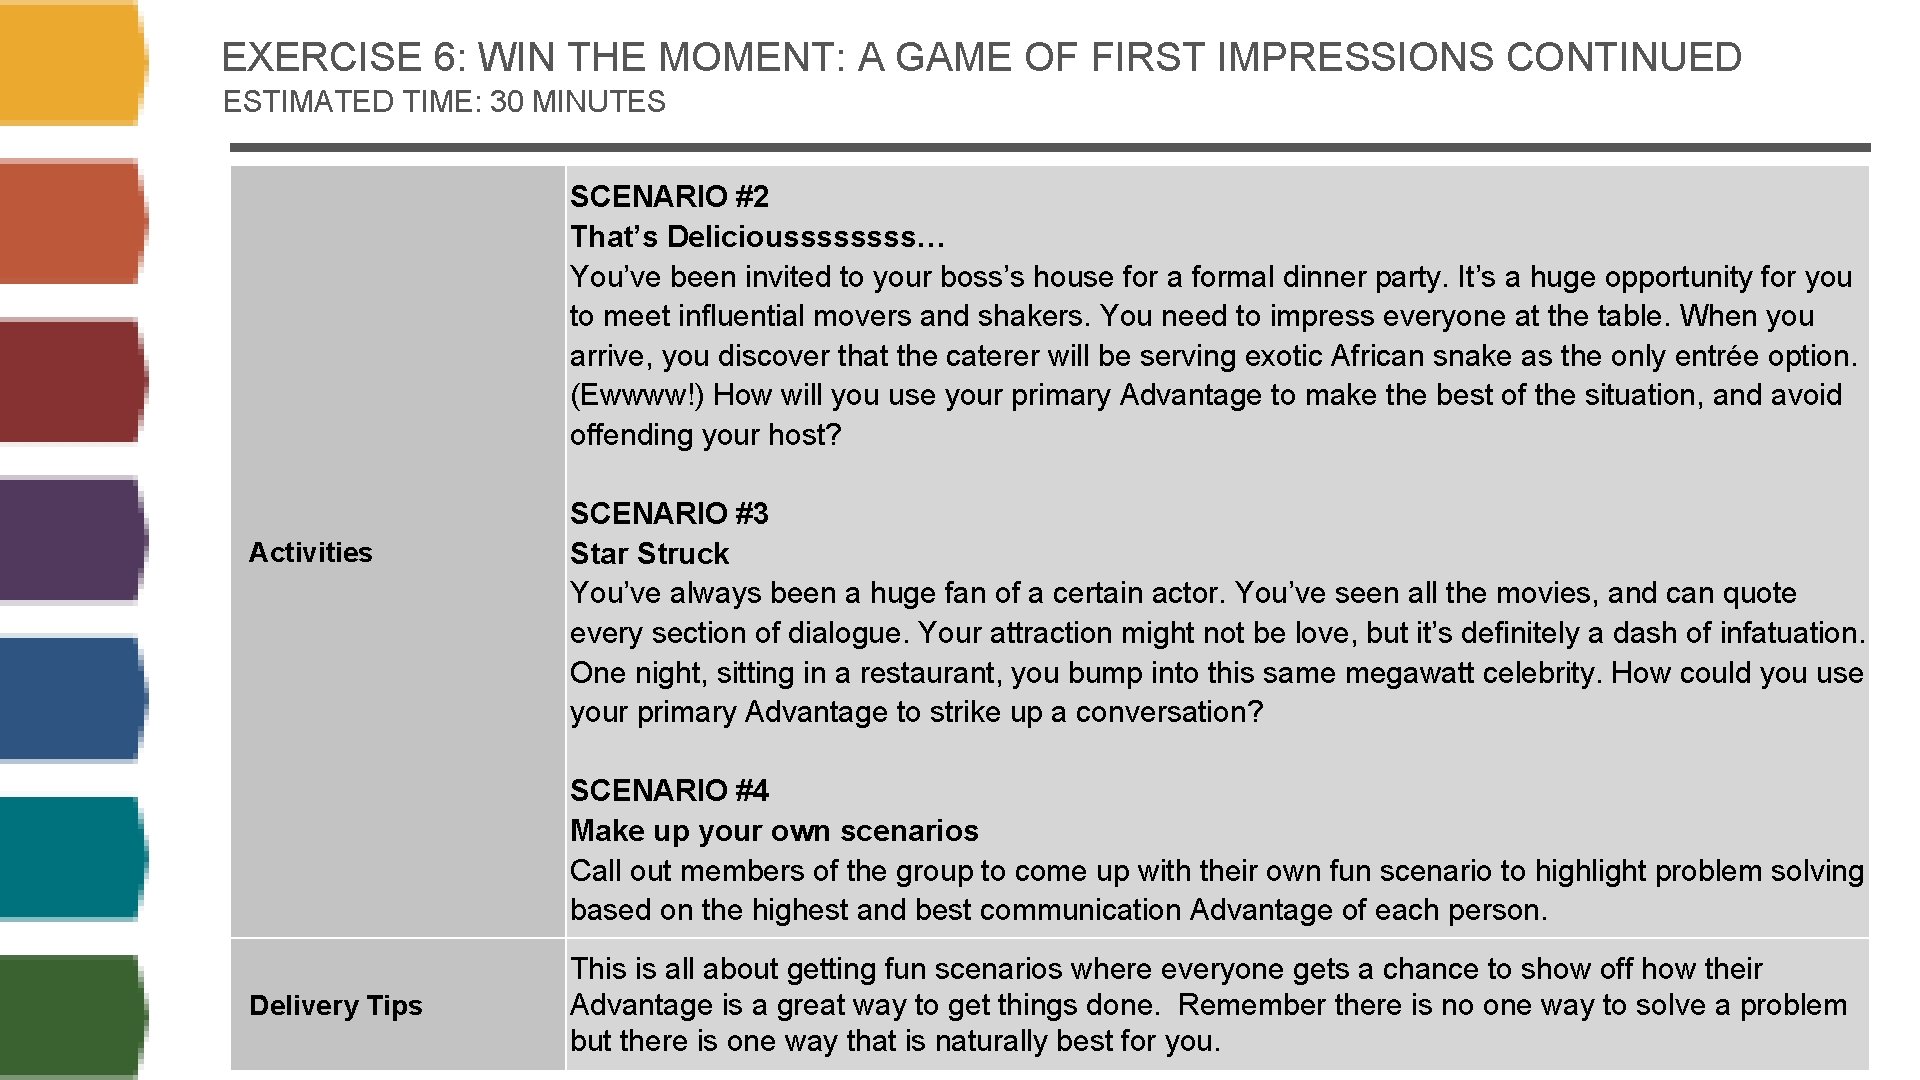 EXERCISE 6: WIN THE MOMENT: A GAME OF FIRST IMPRESSIONS CONTINUED ESTIMATED TIME: 30